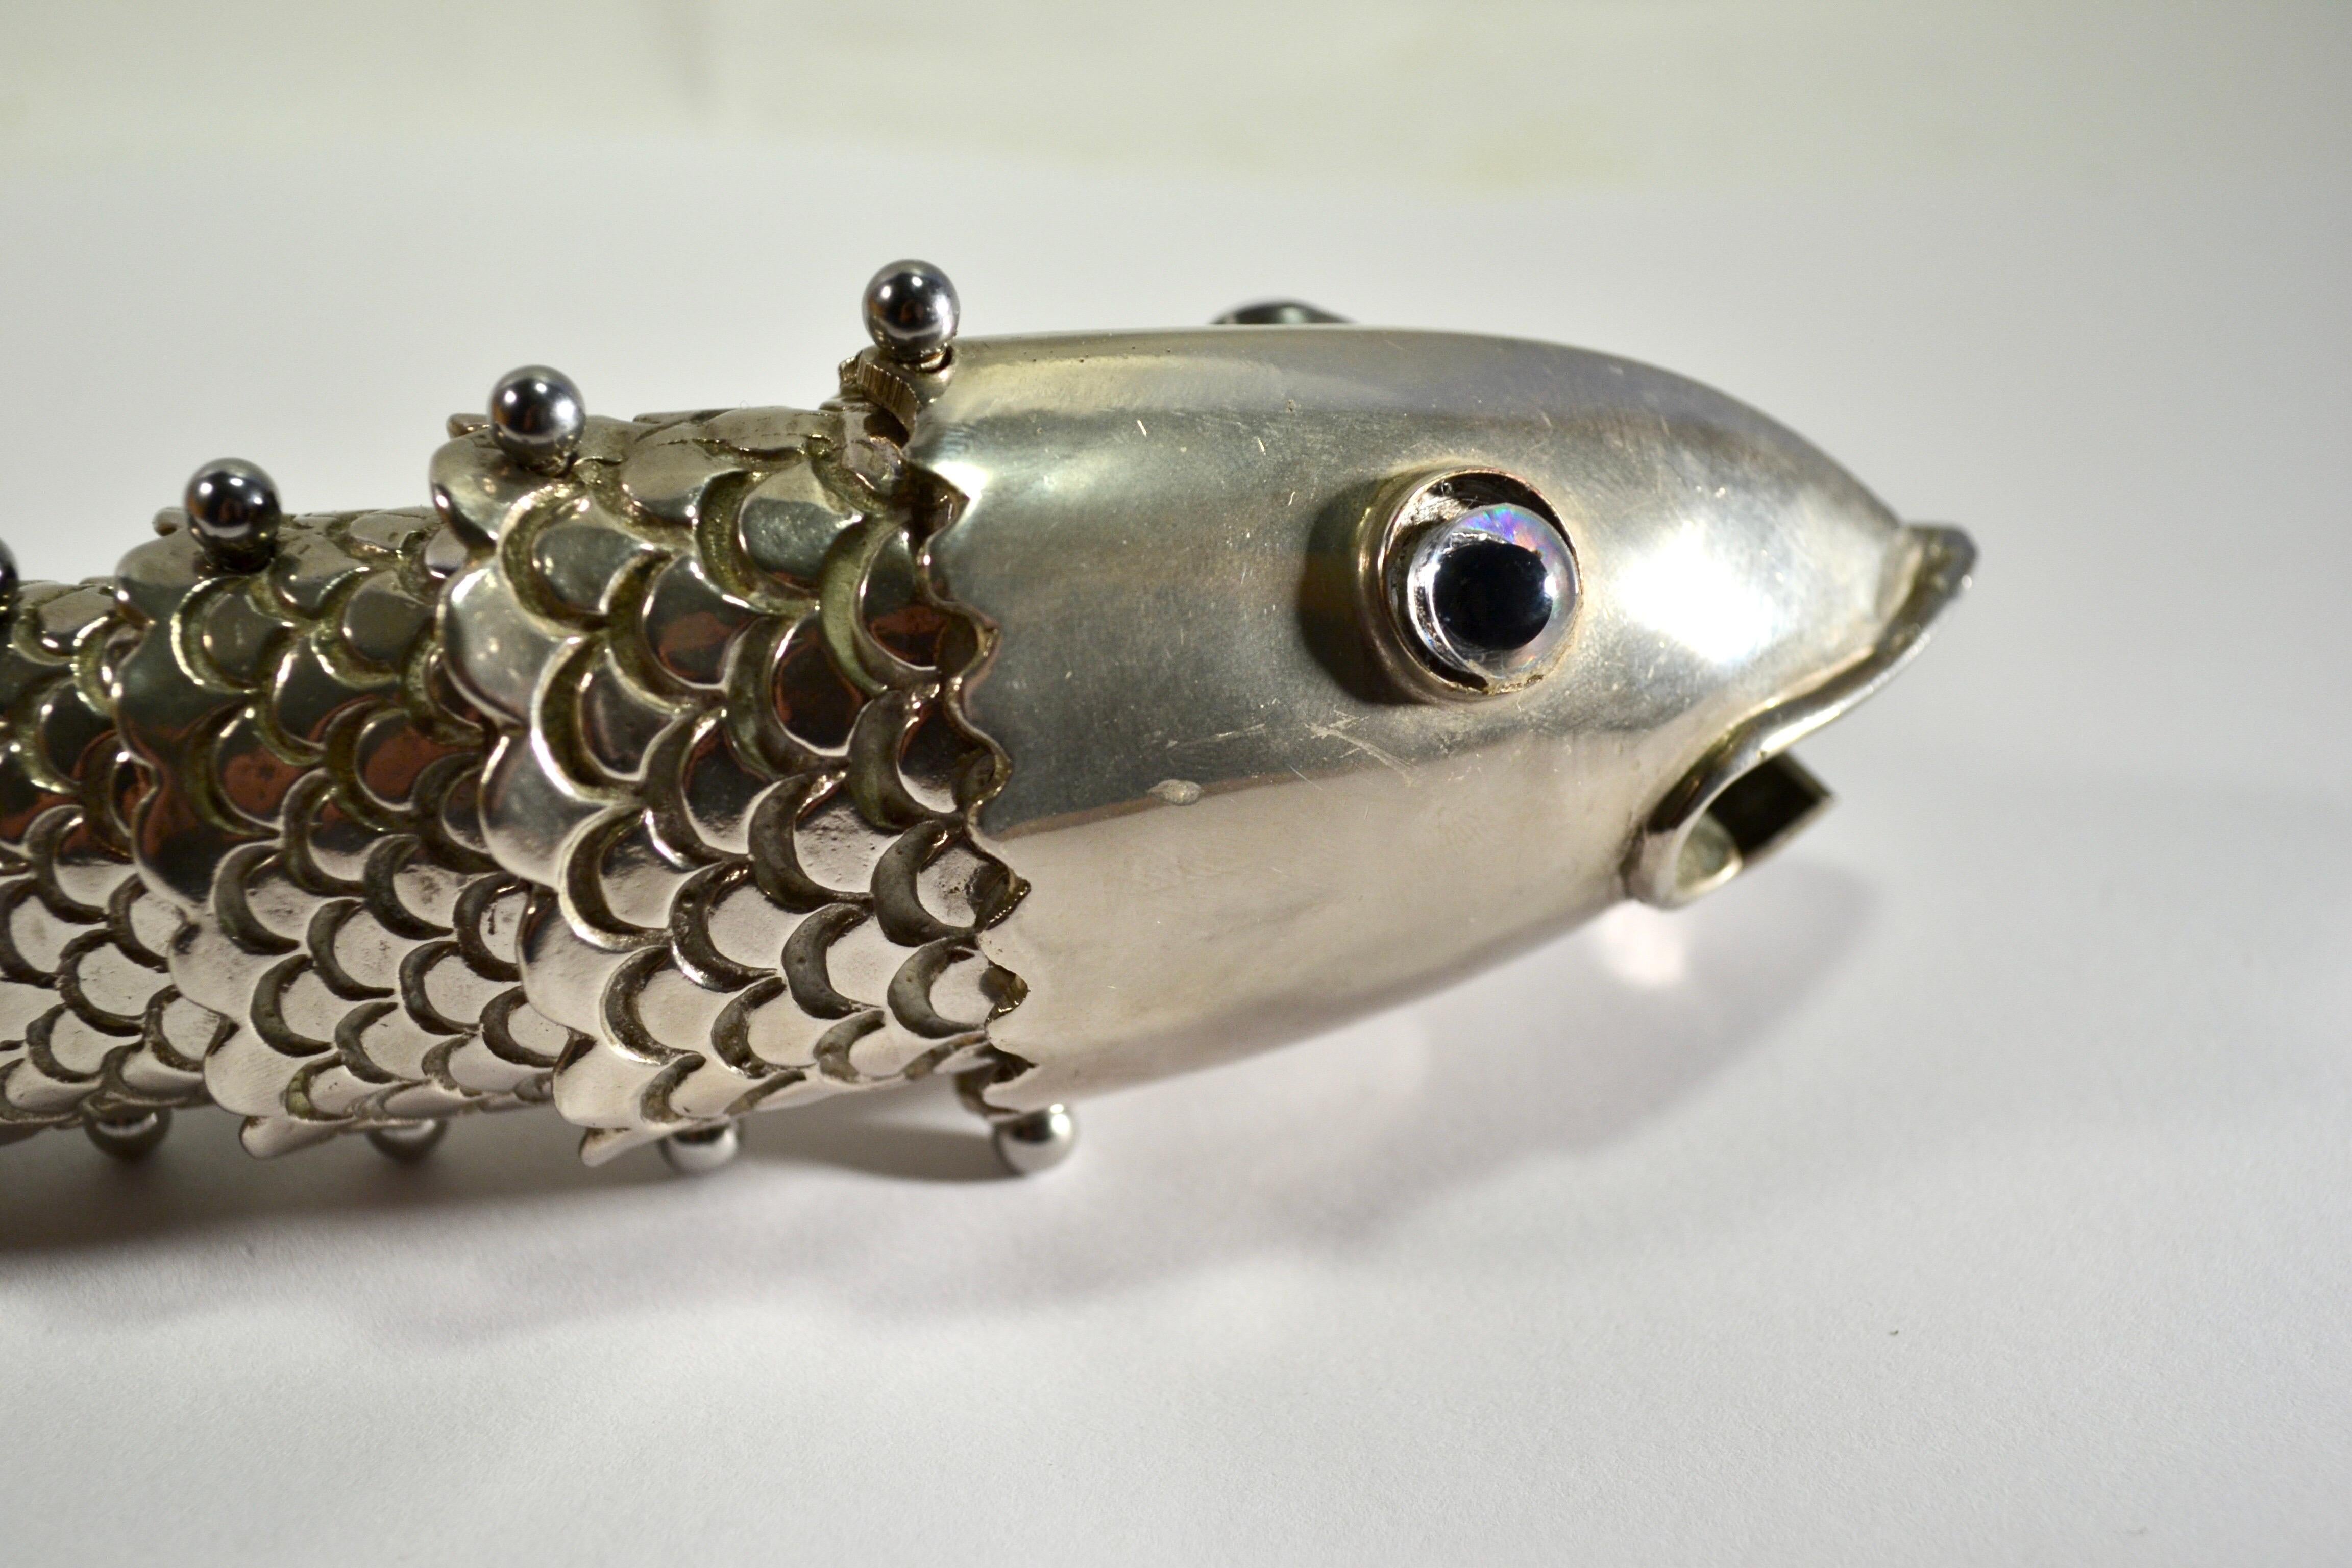 A Gucci bottle opener in silver-plated metal, articulated and shaped like a fish. Made in Italy around 1970, it embodies a remarkable level of craftsmanship, with meticulous details such as finely hand-sculpted scales and impeccable articulations